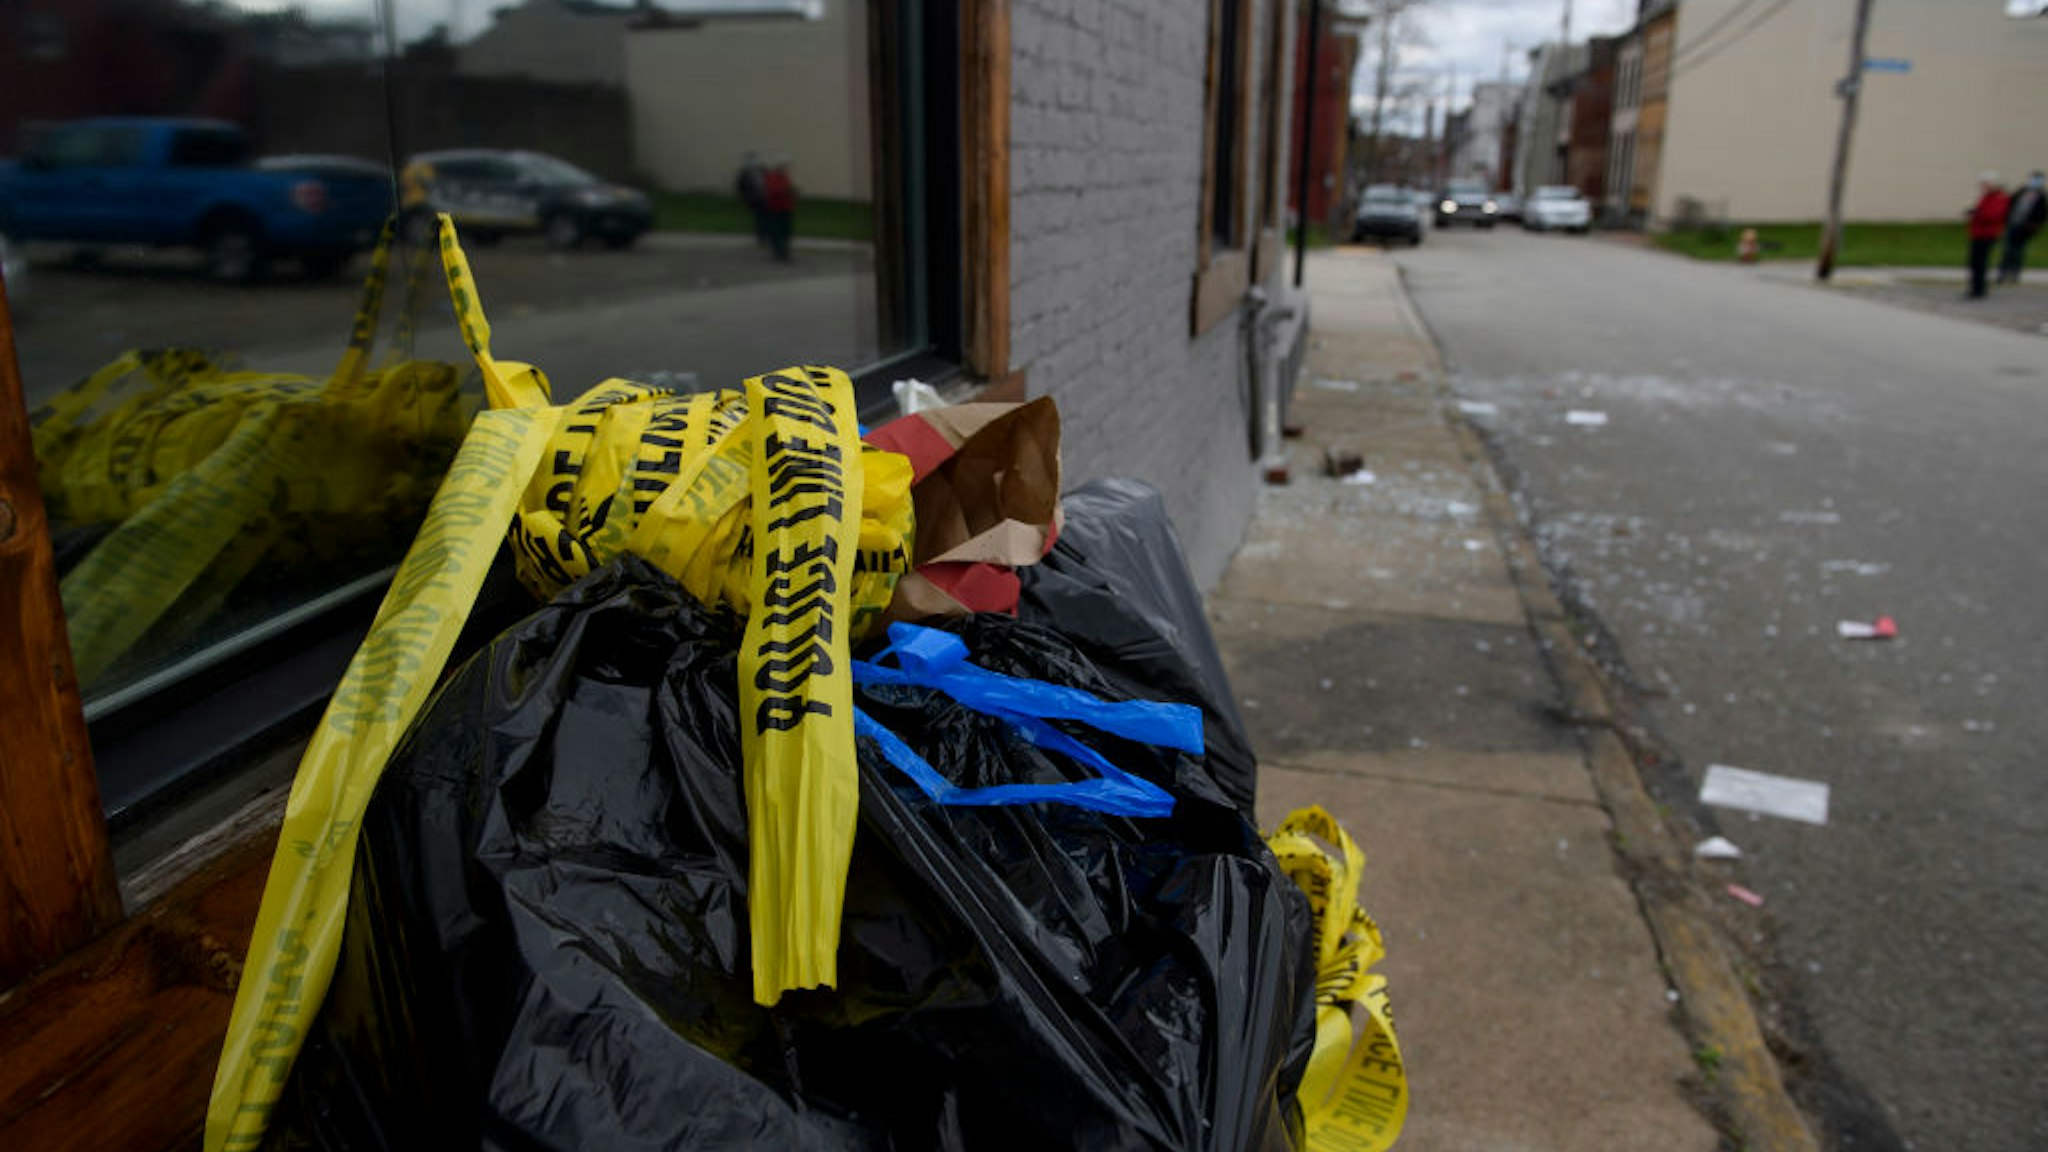 PITTSBURGH, PA - APRIL 17: Police tape, broken glass, and bloodstains outside an Airbnb apartment rental along Suismon Street on April 17, 2022 in Pittsburgh, Pennsylvania. Last night, a shooting at a house party at the rental left two people dead and nine injured. (Photo by Jeff Swensen/Getty Images)